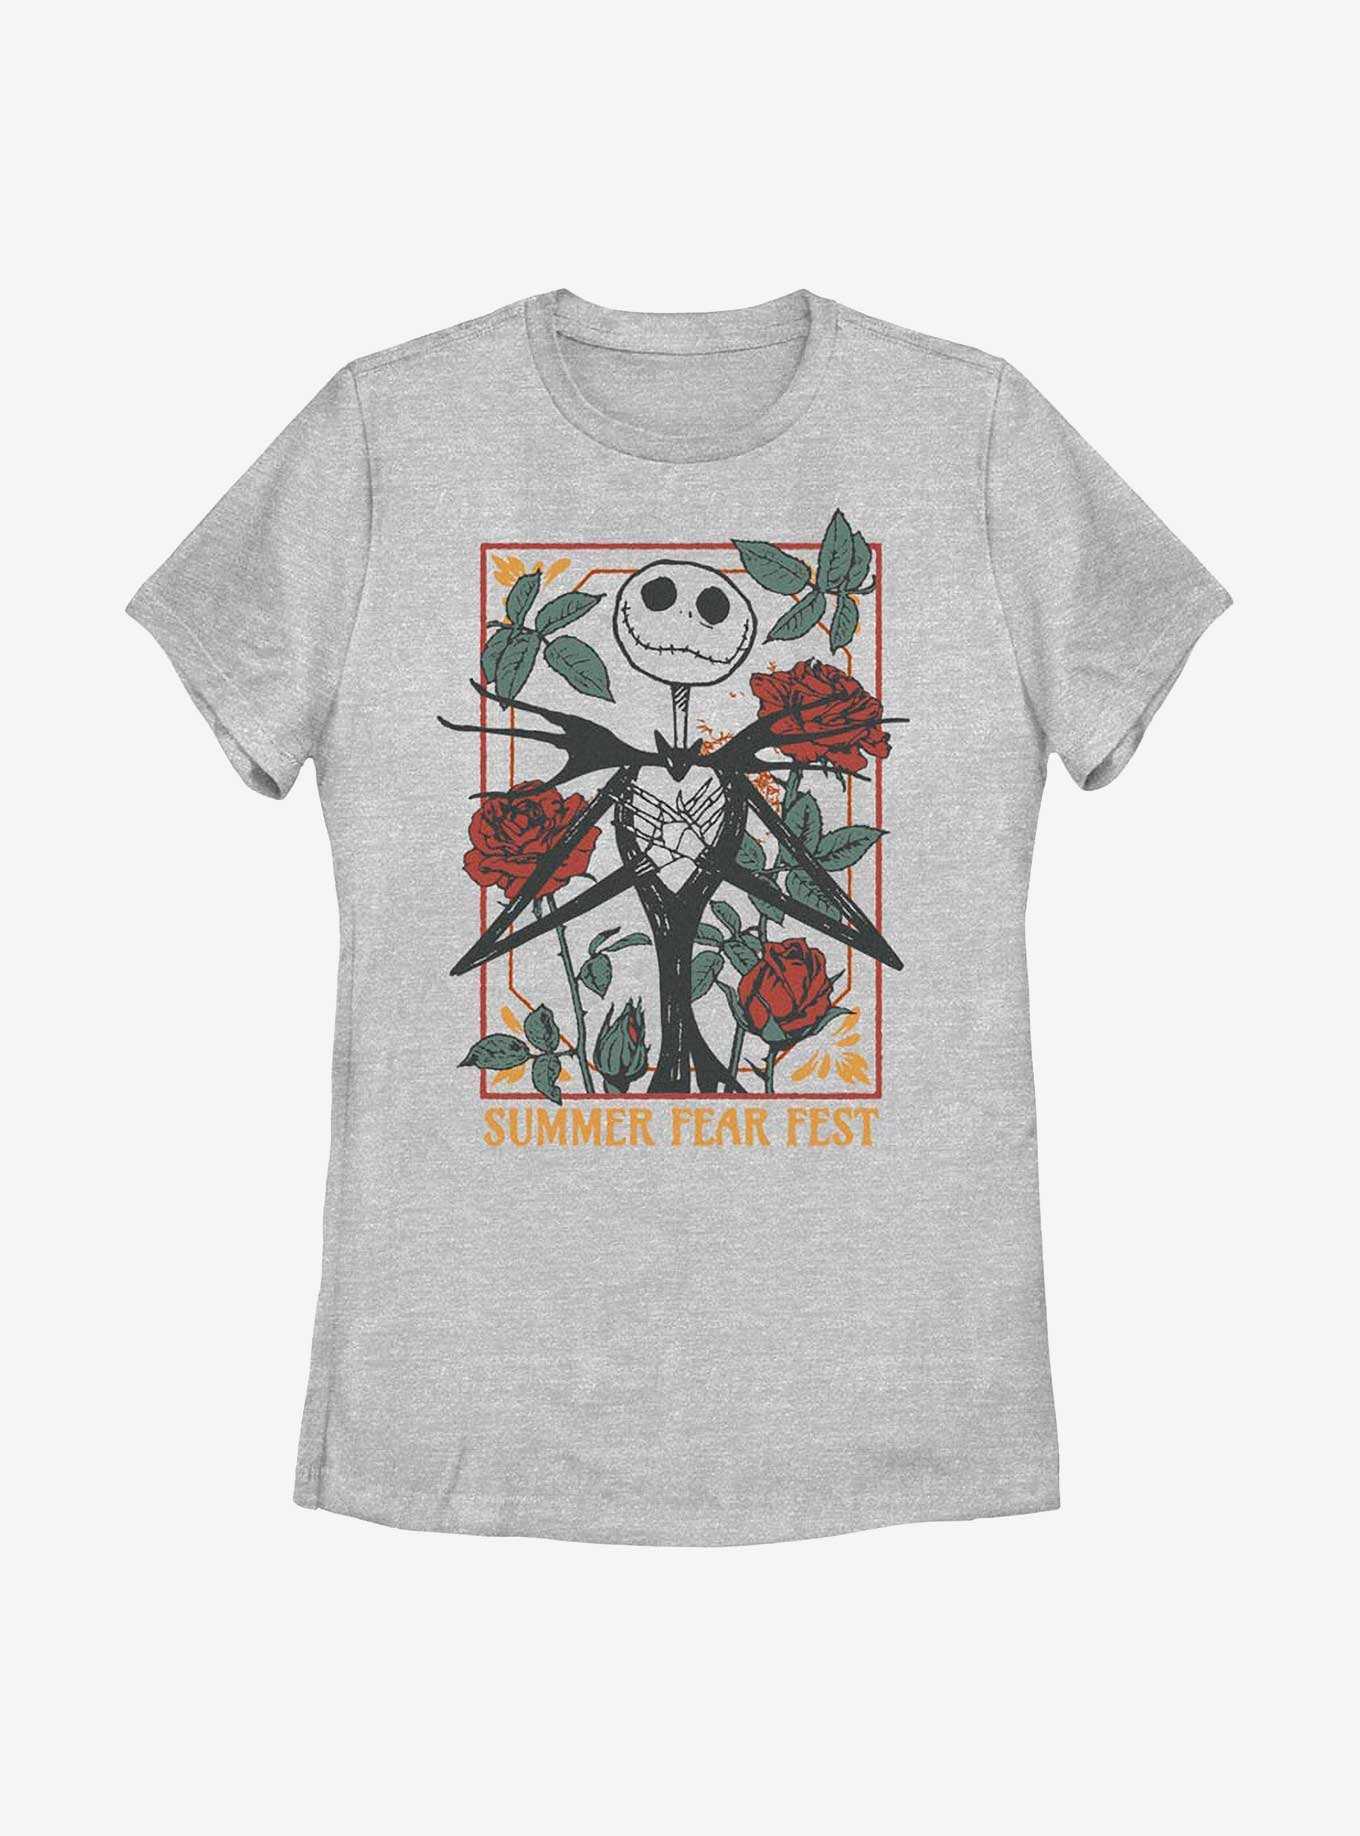 Disney The Nightmare Before Christmas Jack Summer Fear Fest Womens T-Shirt, , hi-res